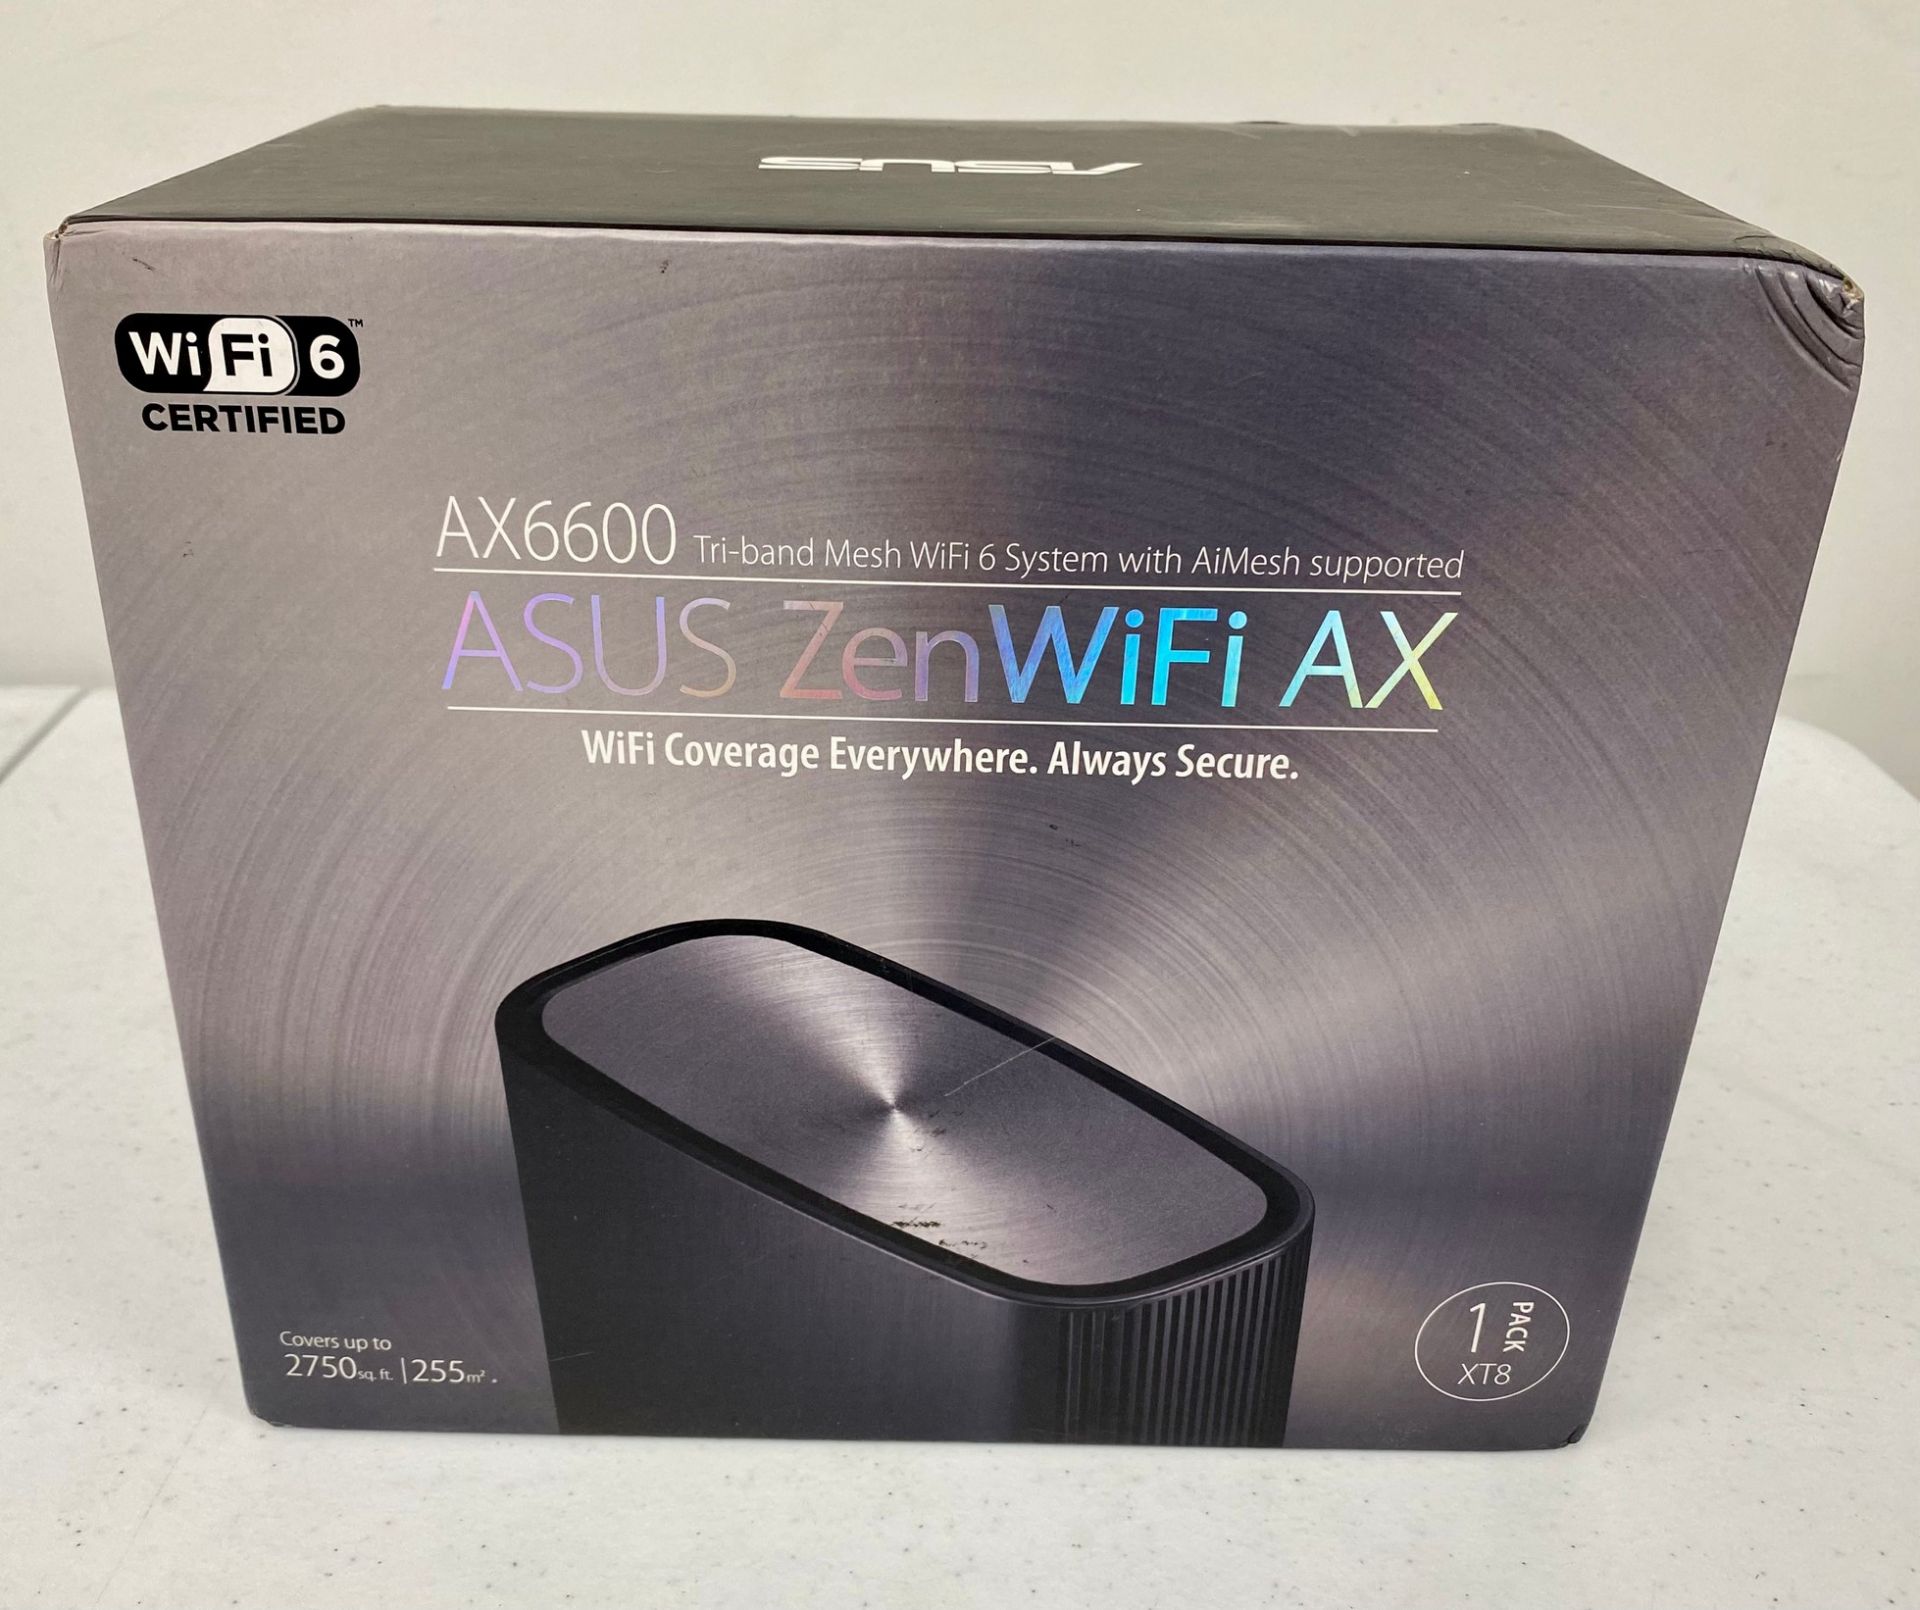 A boxed as new Asus ZenWiFi AX AX6600 Whole Home Mesh Wi-Fi 6 System in Black (1-Pack M/N: X8) (Box